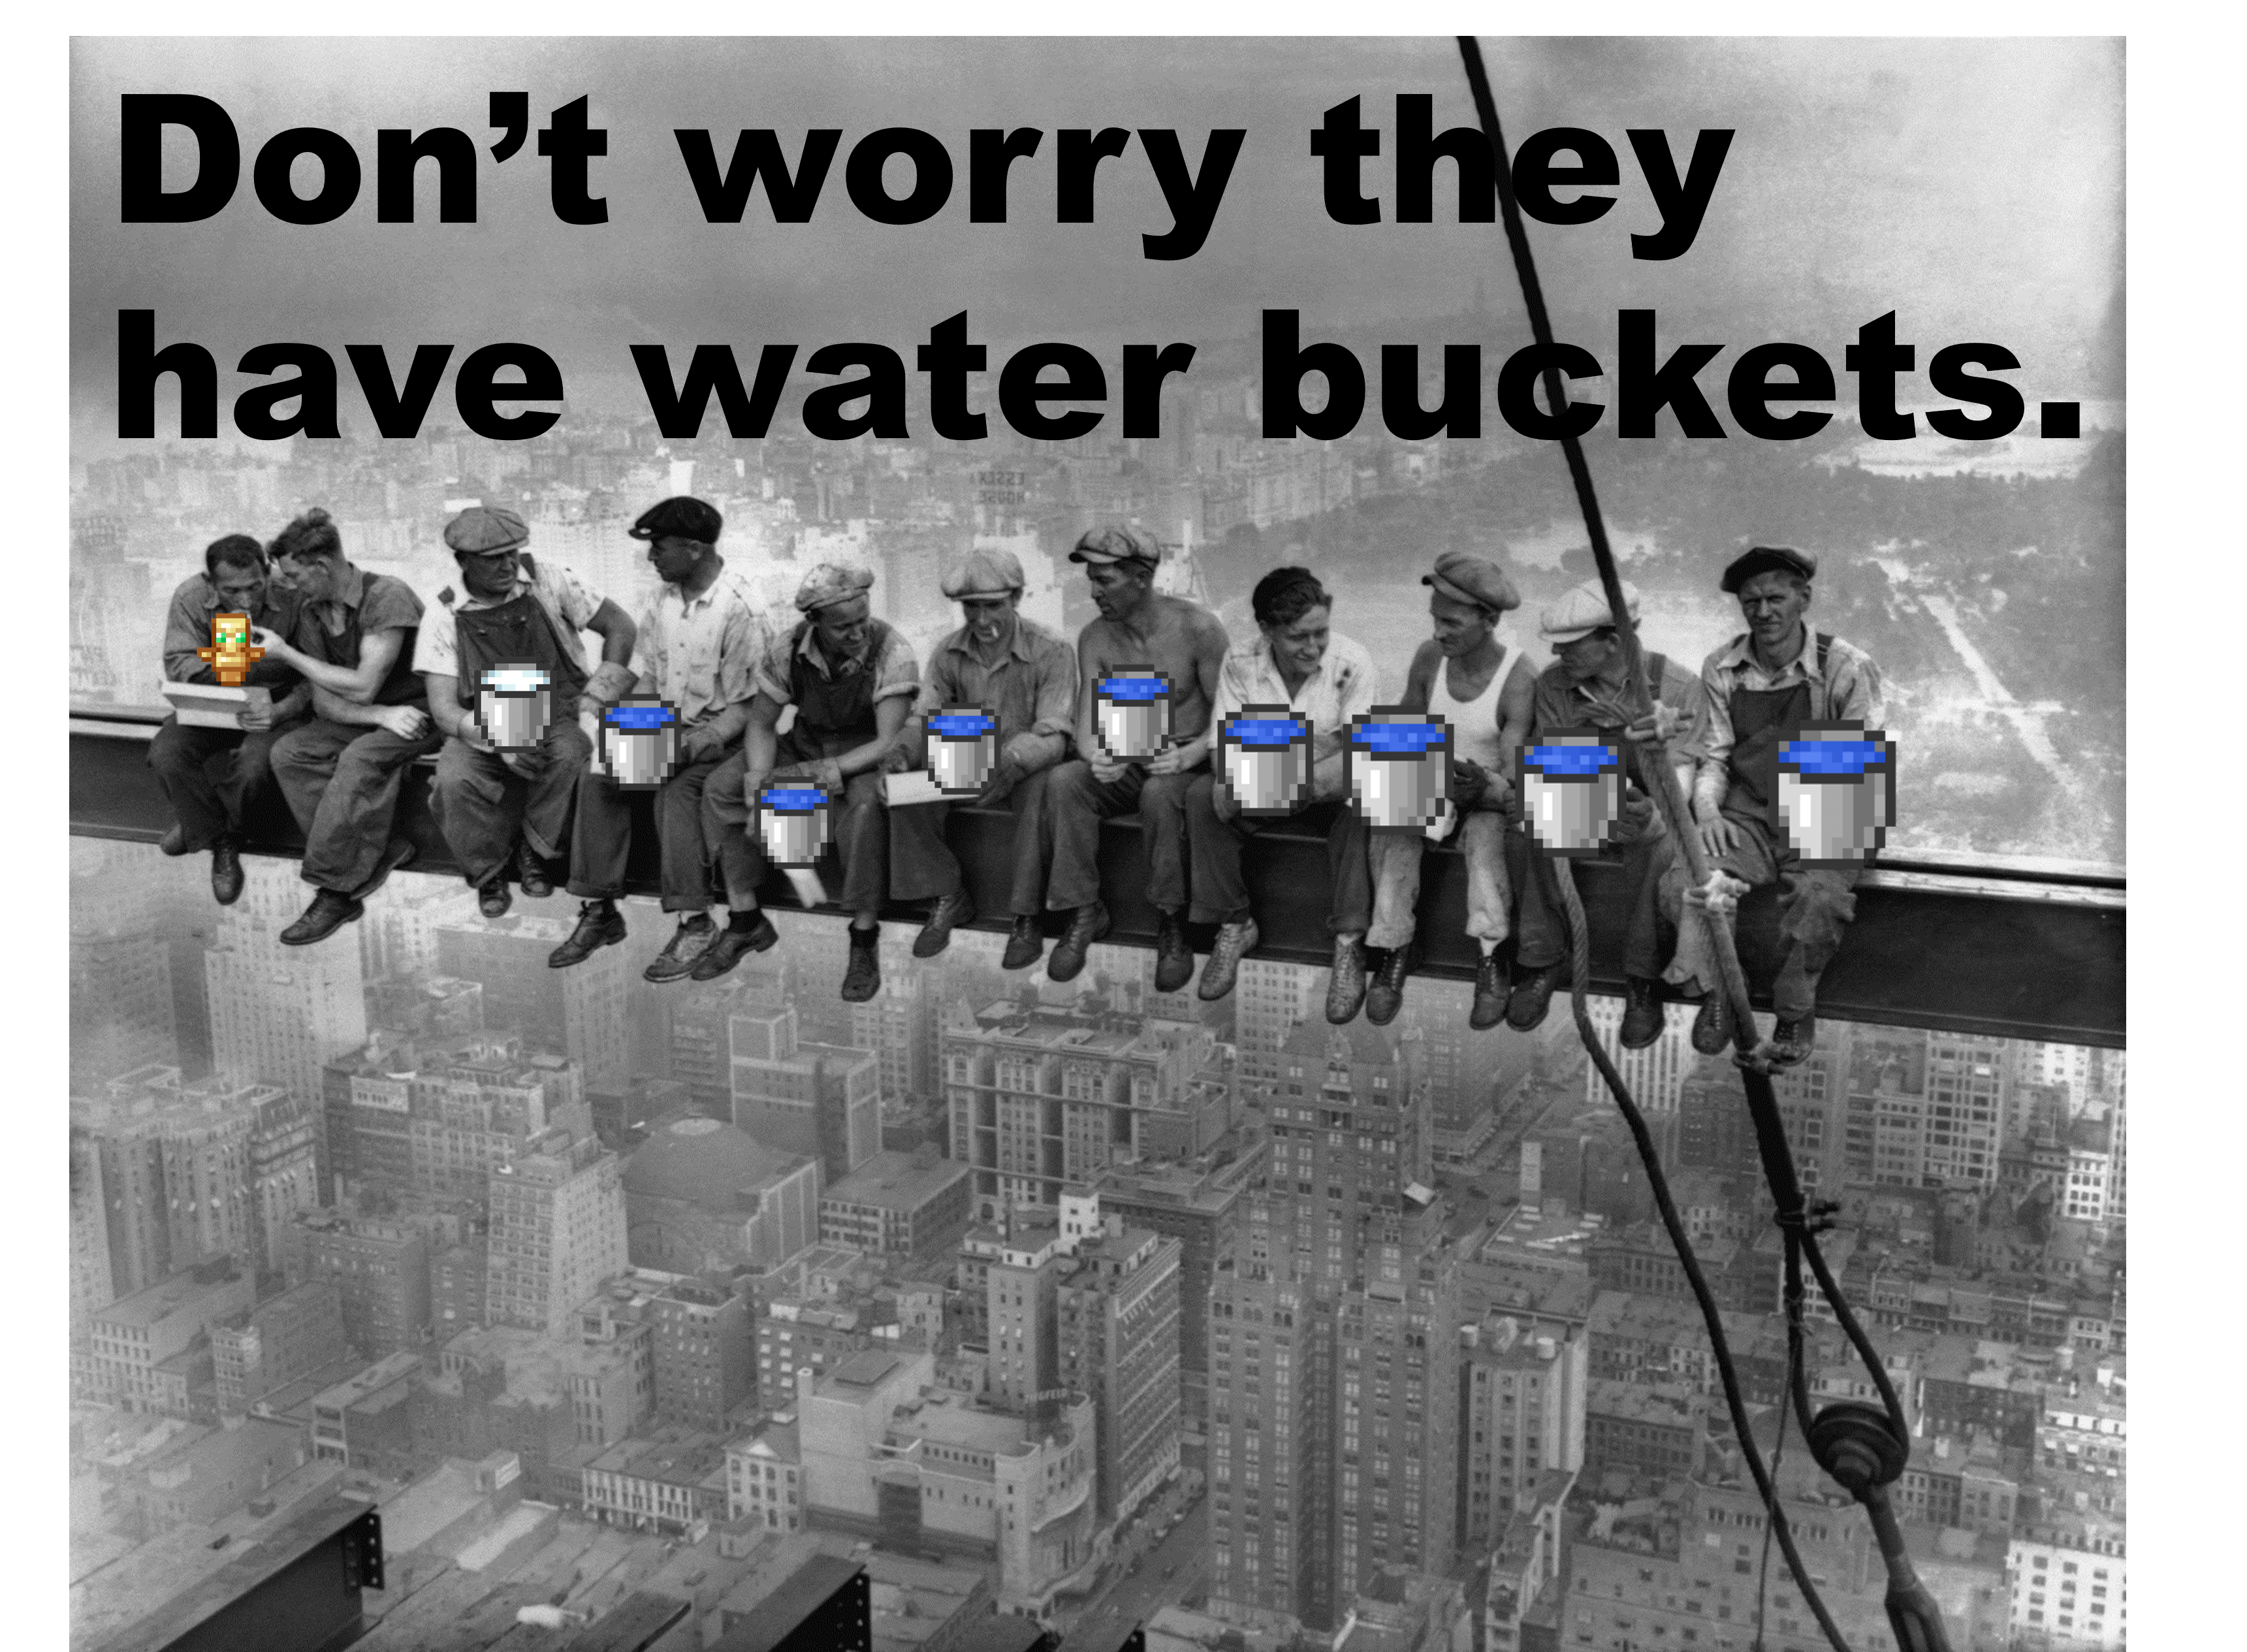 Minecraft Memes - "Relax, they got water buckets"